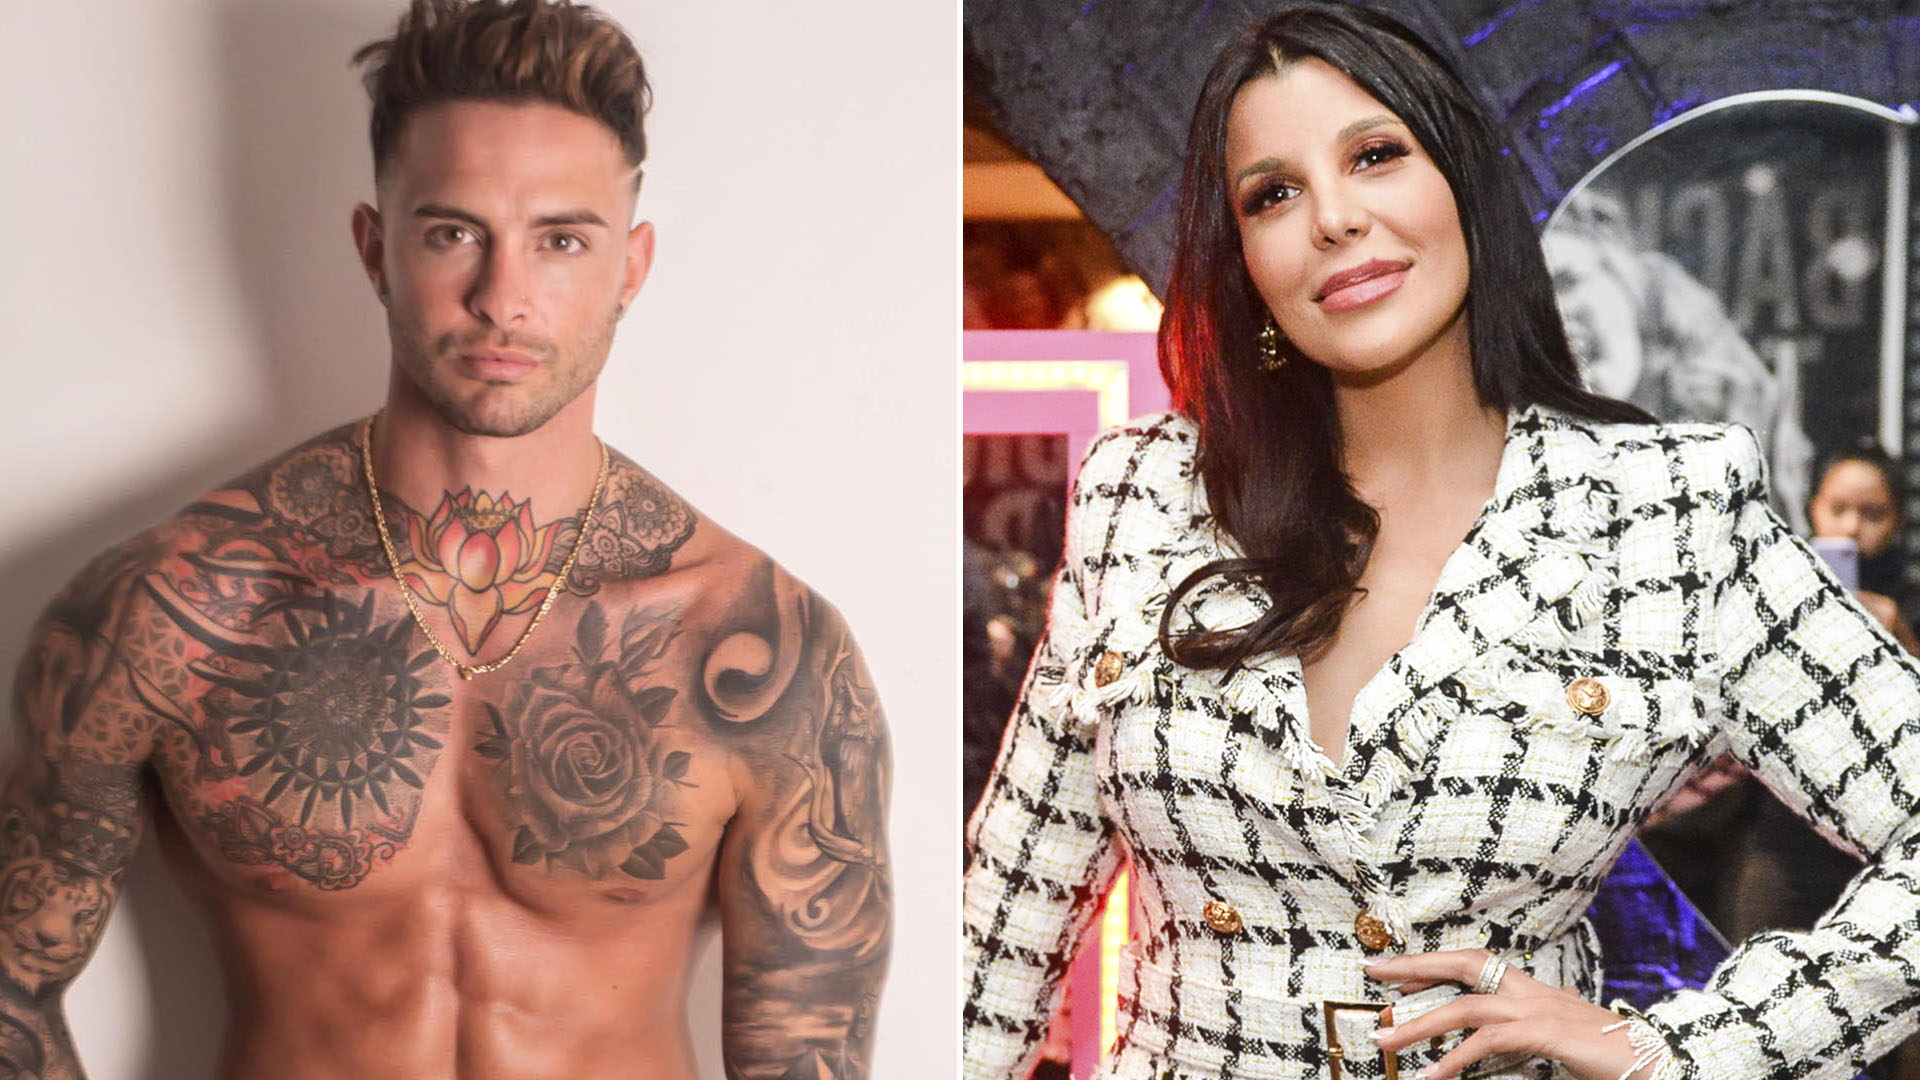 Ian Hatchman and Charlotte Caniggia: Have a Couple Made Up?